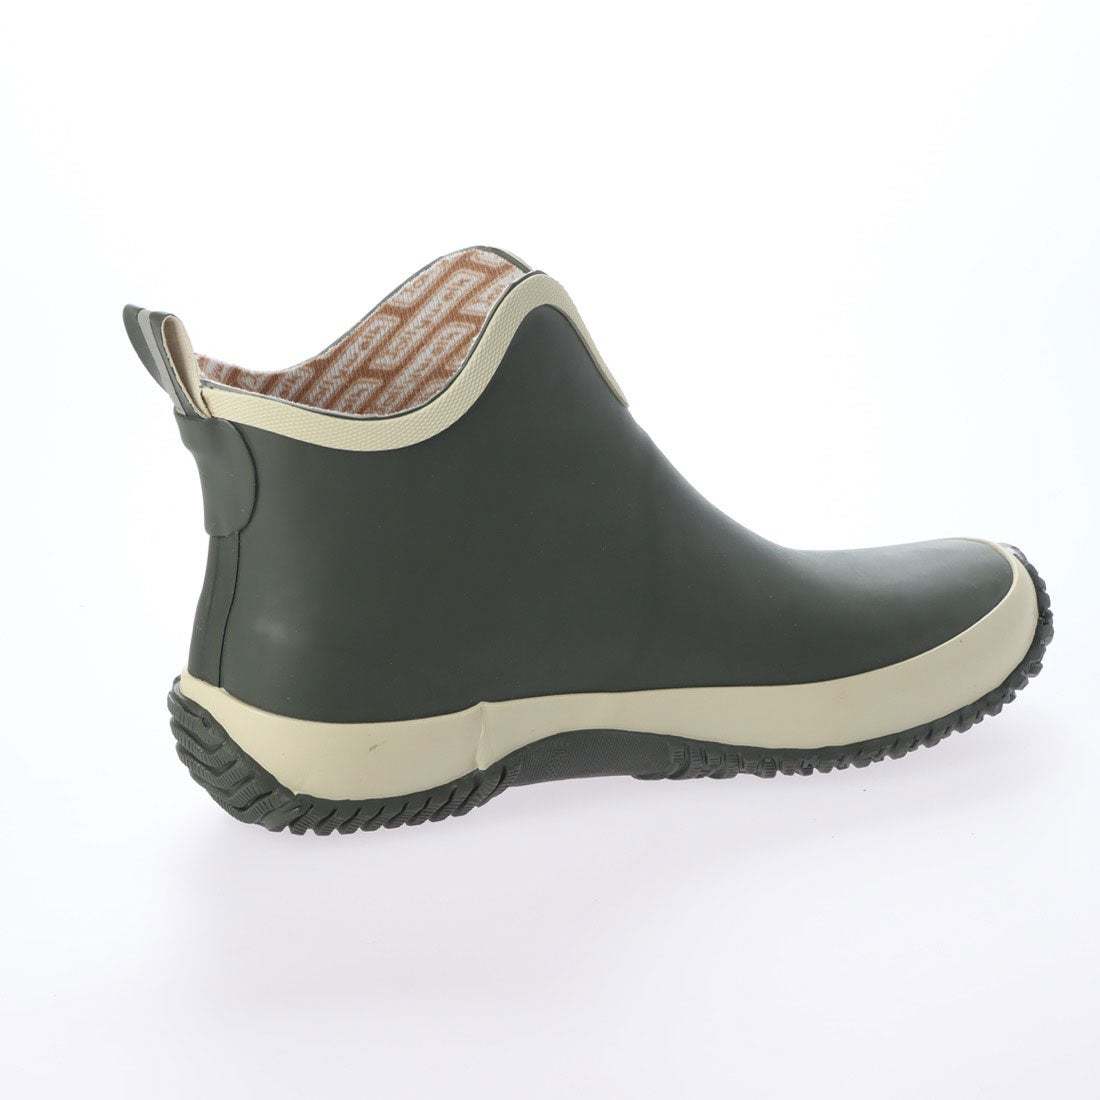  men's rain boots rain shoes boots rain shoes natural rubber material new goods [20089-kha-265]26.5cm stock one . sale 